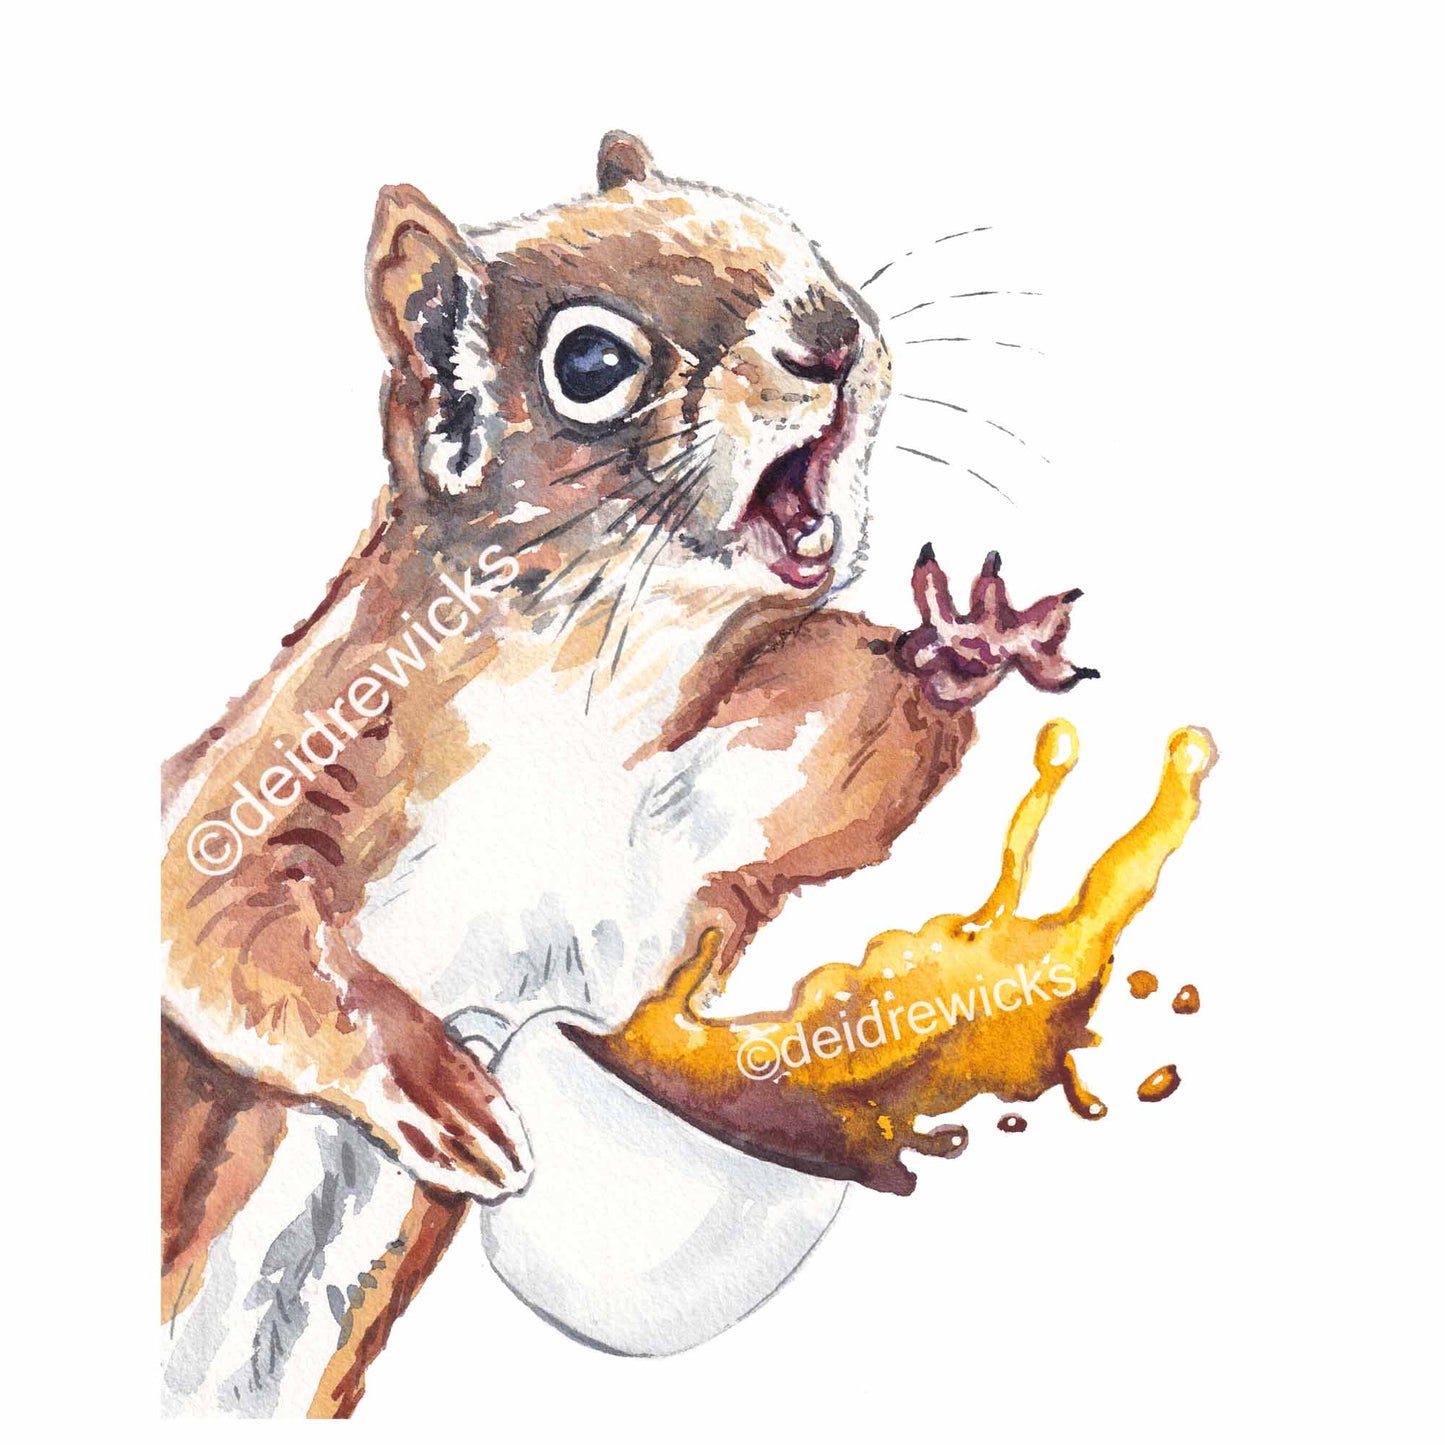 Watercolour painting of a red squirrel about to spill his fresh cup of coffee. Original art by Deidre Wicks